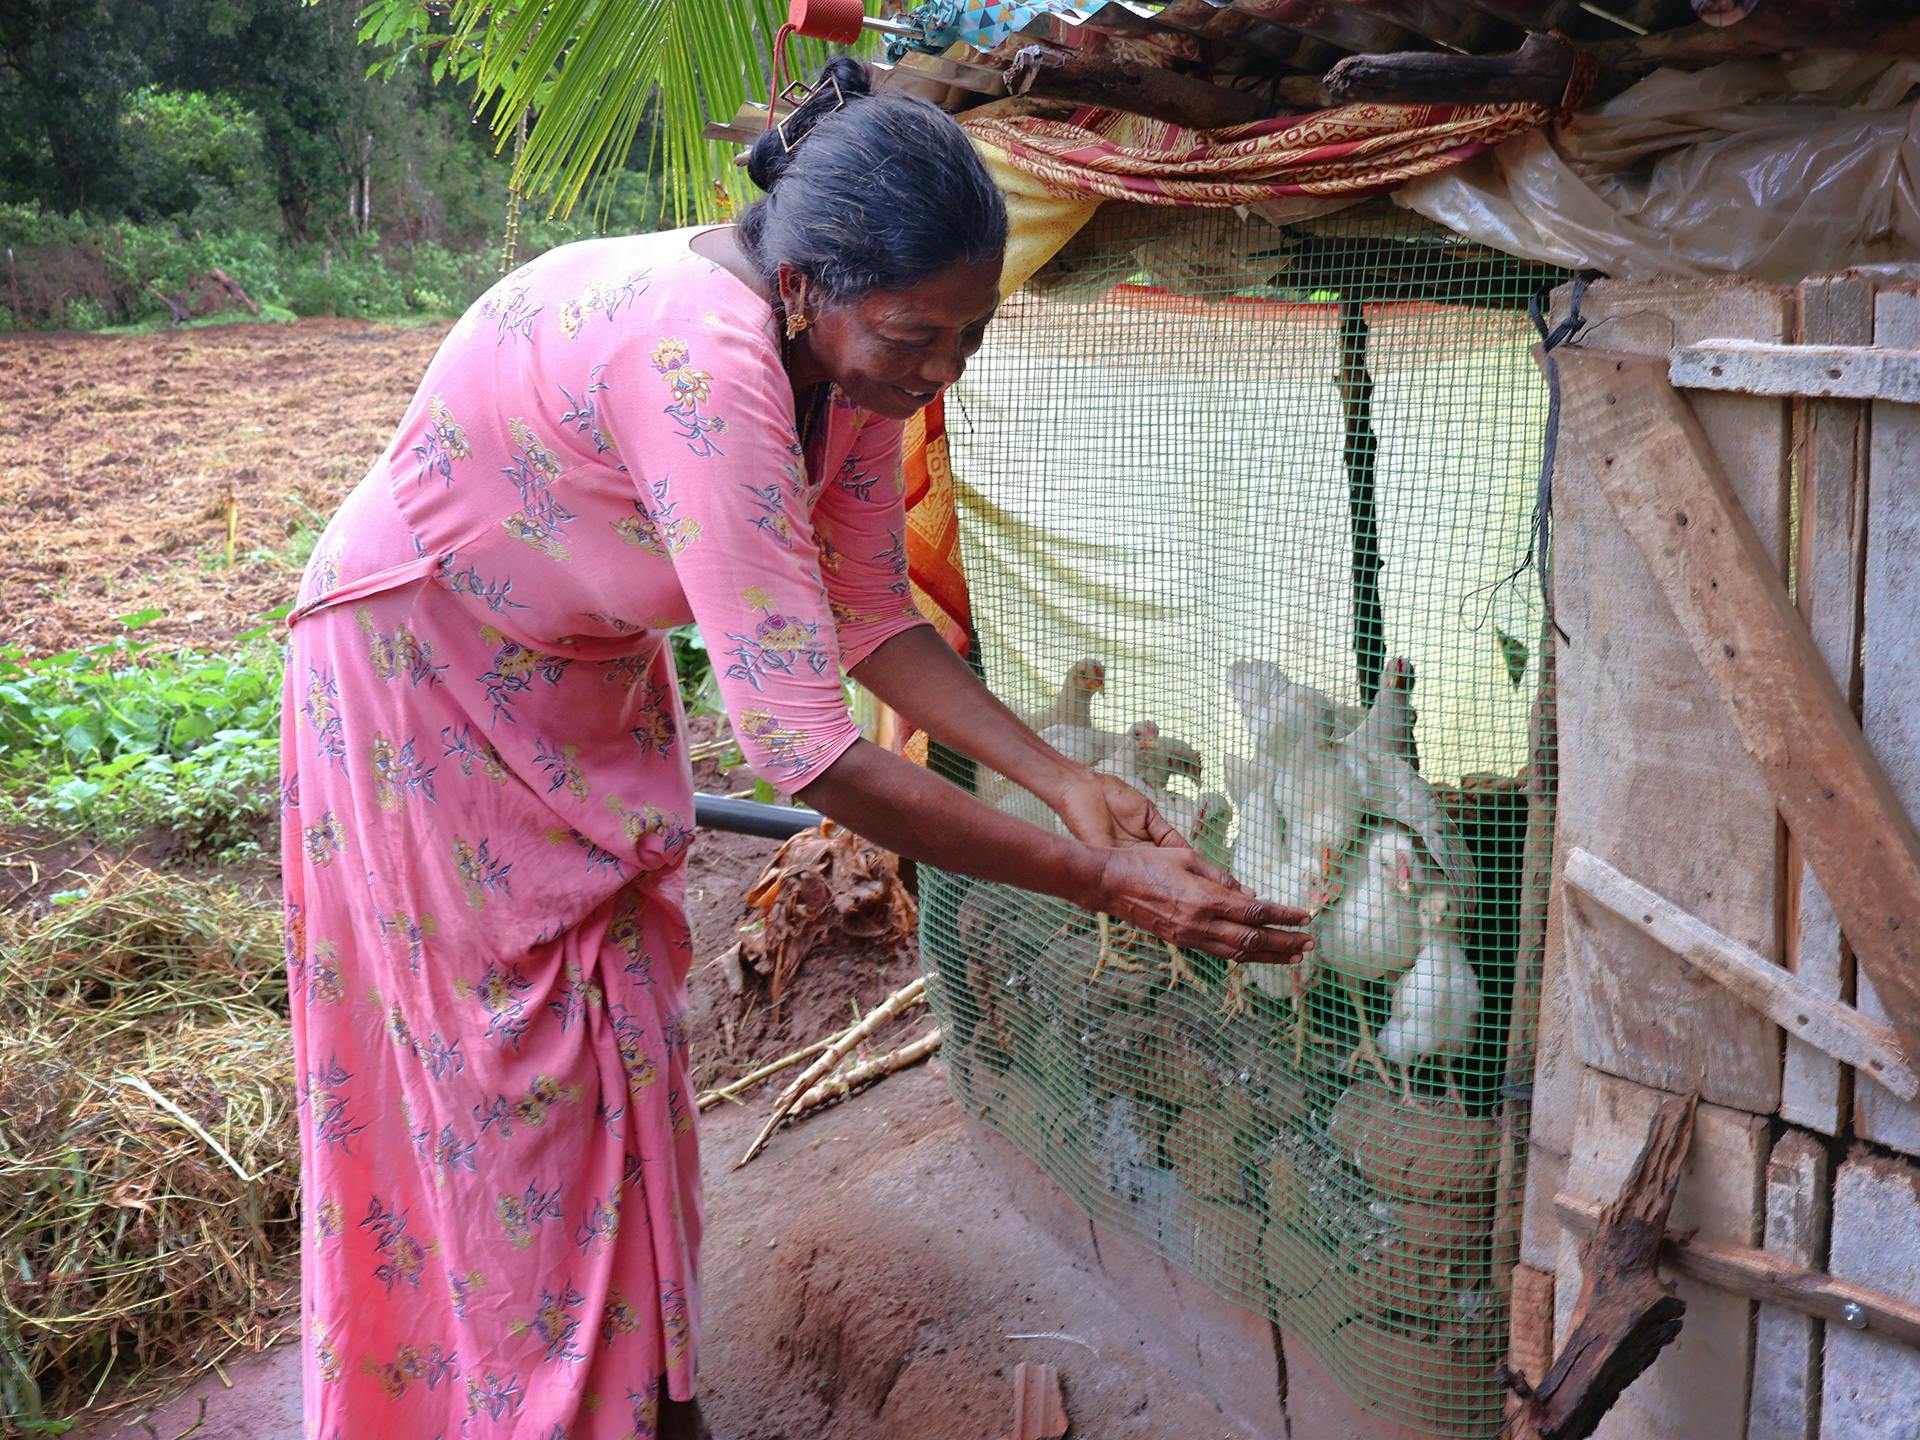 A woman in a pink dress feeding chickens.